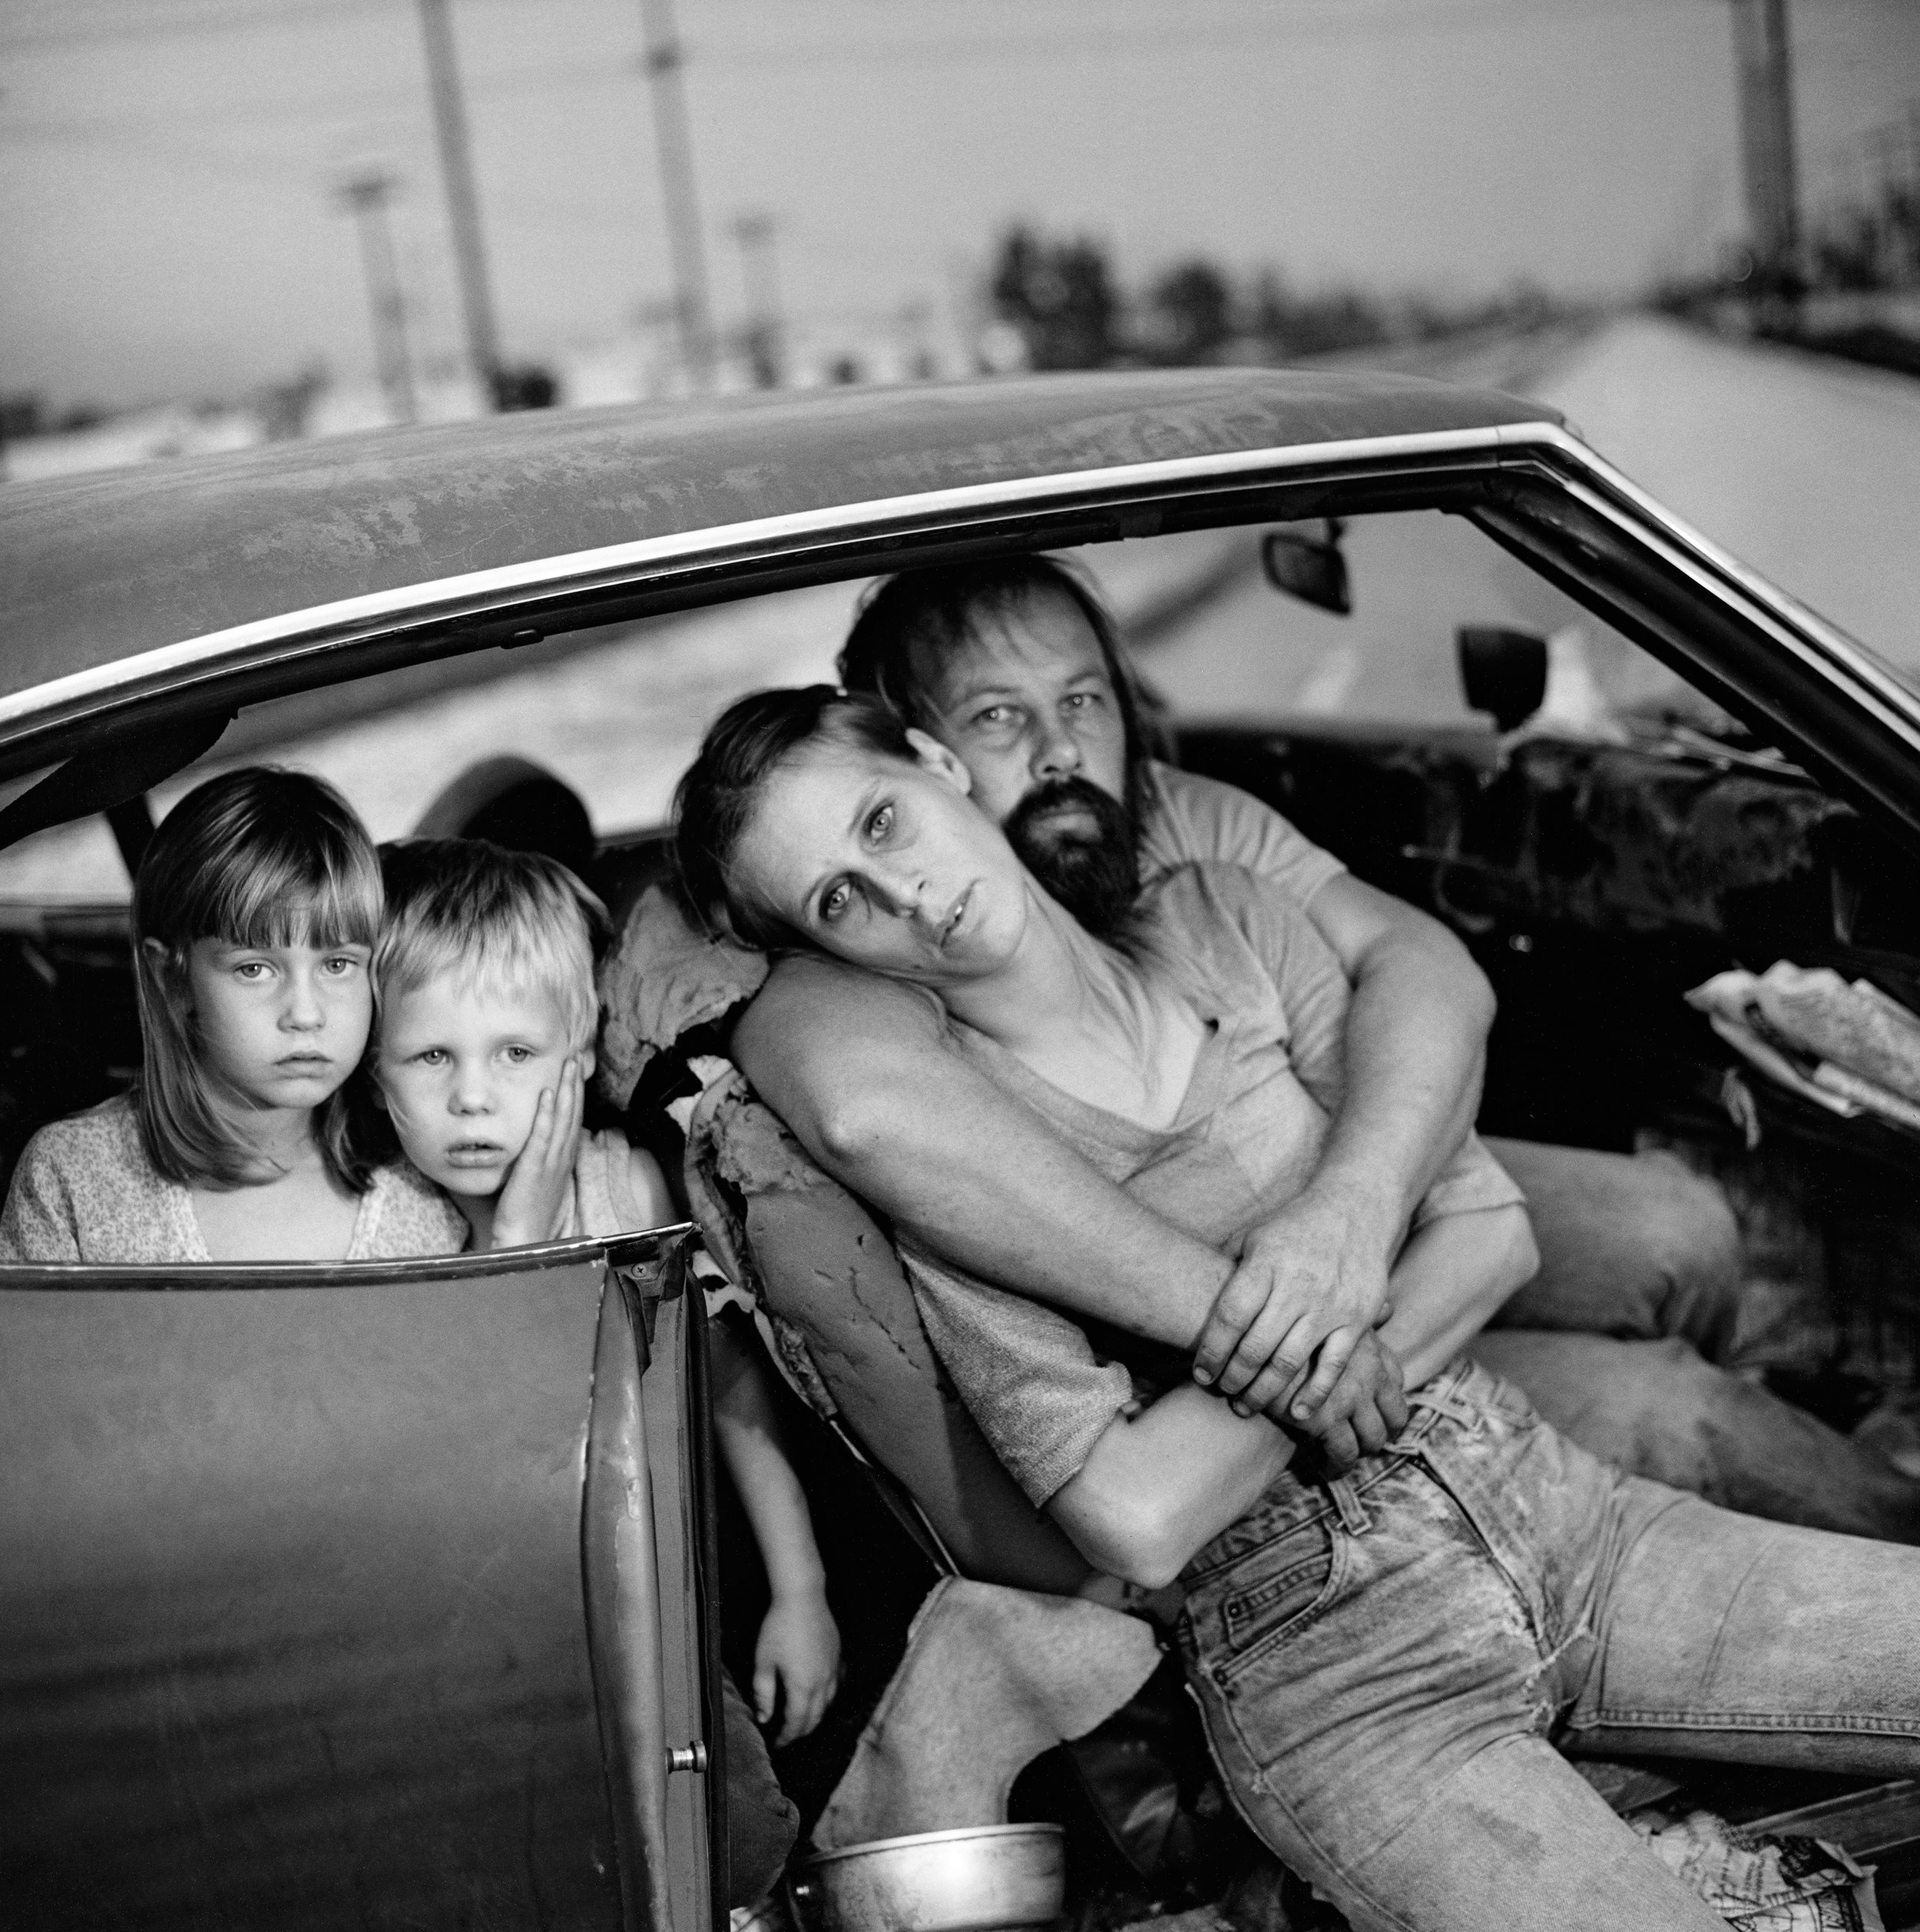  Mary Ellen Mark (United States, 1940–2015),  The Damm Family in Their Car, Los Angeles, California , 1987, gelatin silver print, 10 3/16 x10 1/4 inches. Portland Museum of Art, Maine. Gift of the artist for the Ernst Haas Memorial Collection, 1998.7